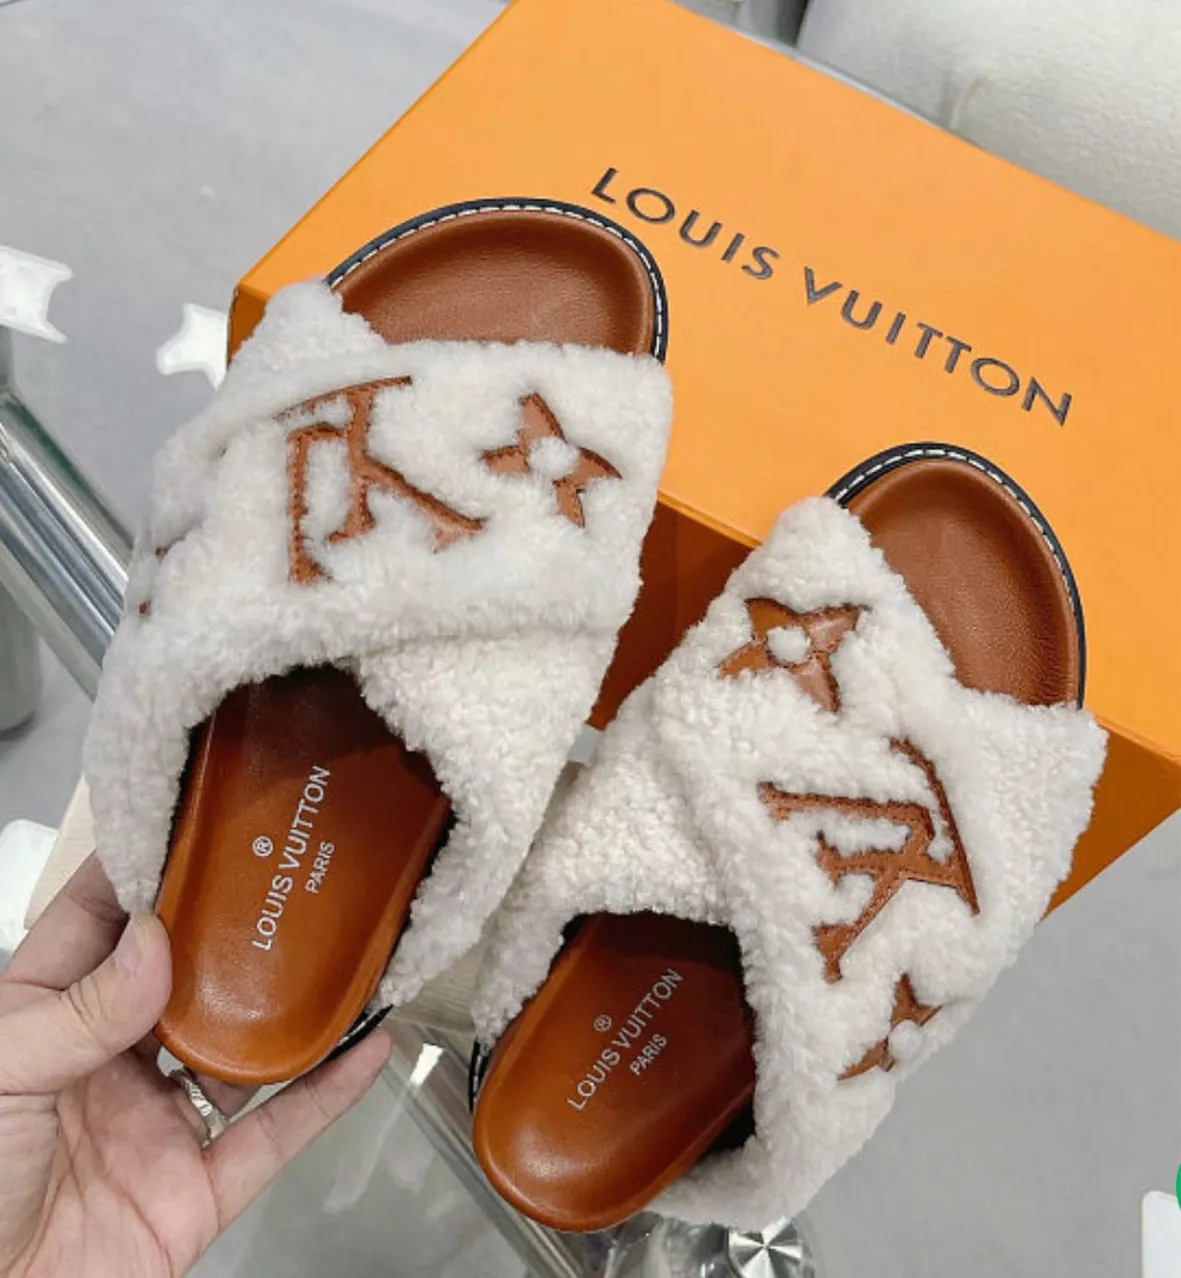 AUTHENTIC LOUIS VUITTON SANDALS comes with box and